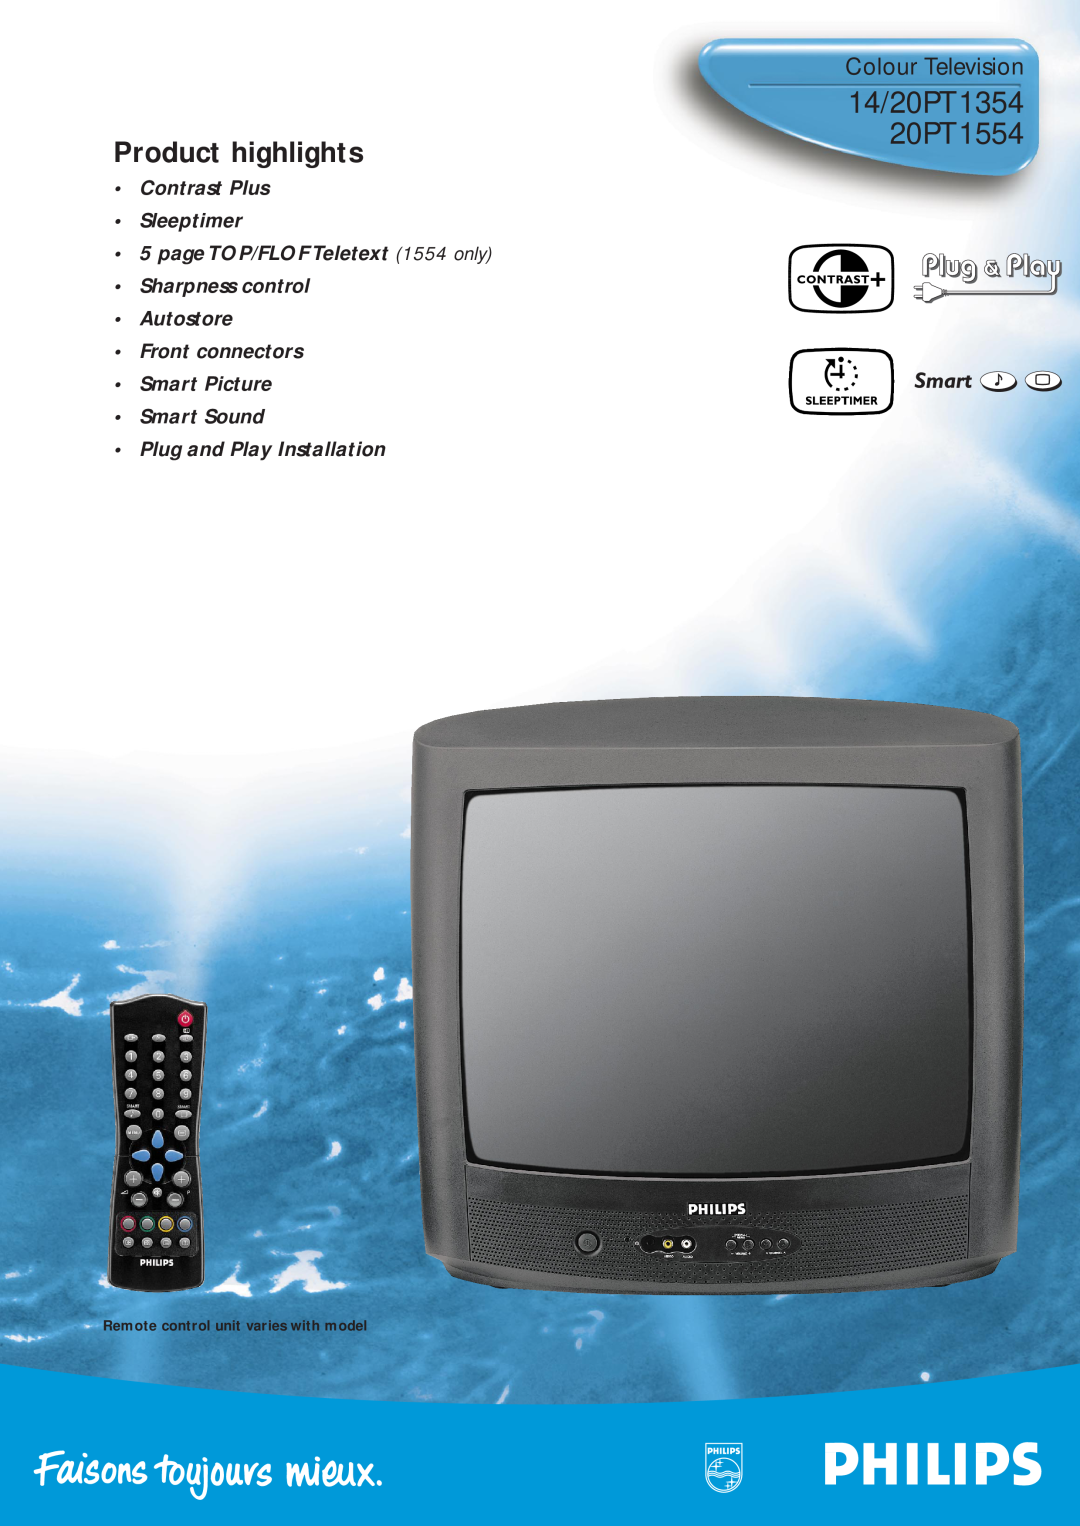 Philips manual 14/20PT1354 20PT1554, Product highlights, Colour Television, Smart Sound Plug and Play Installation 